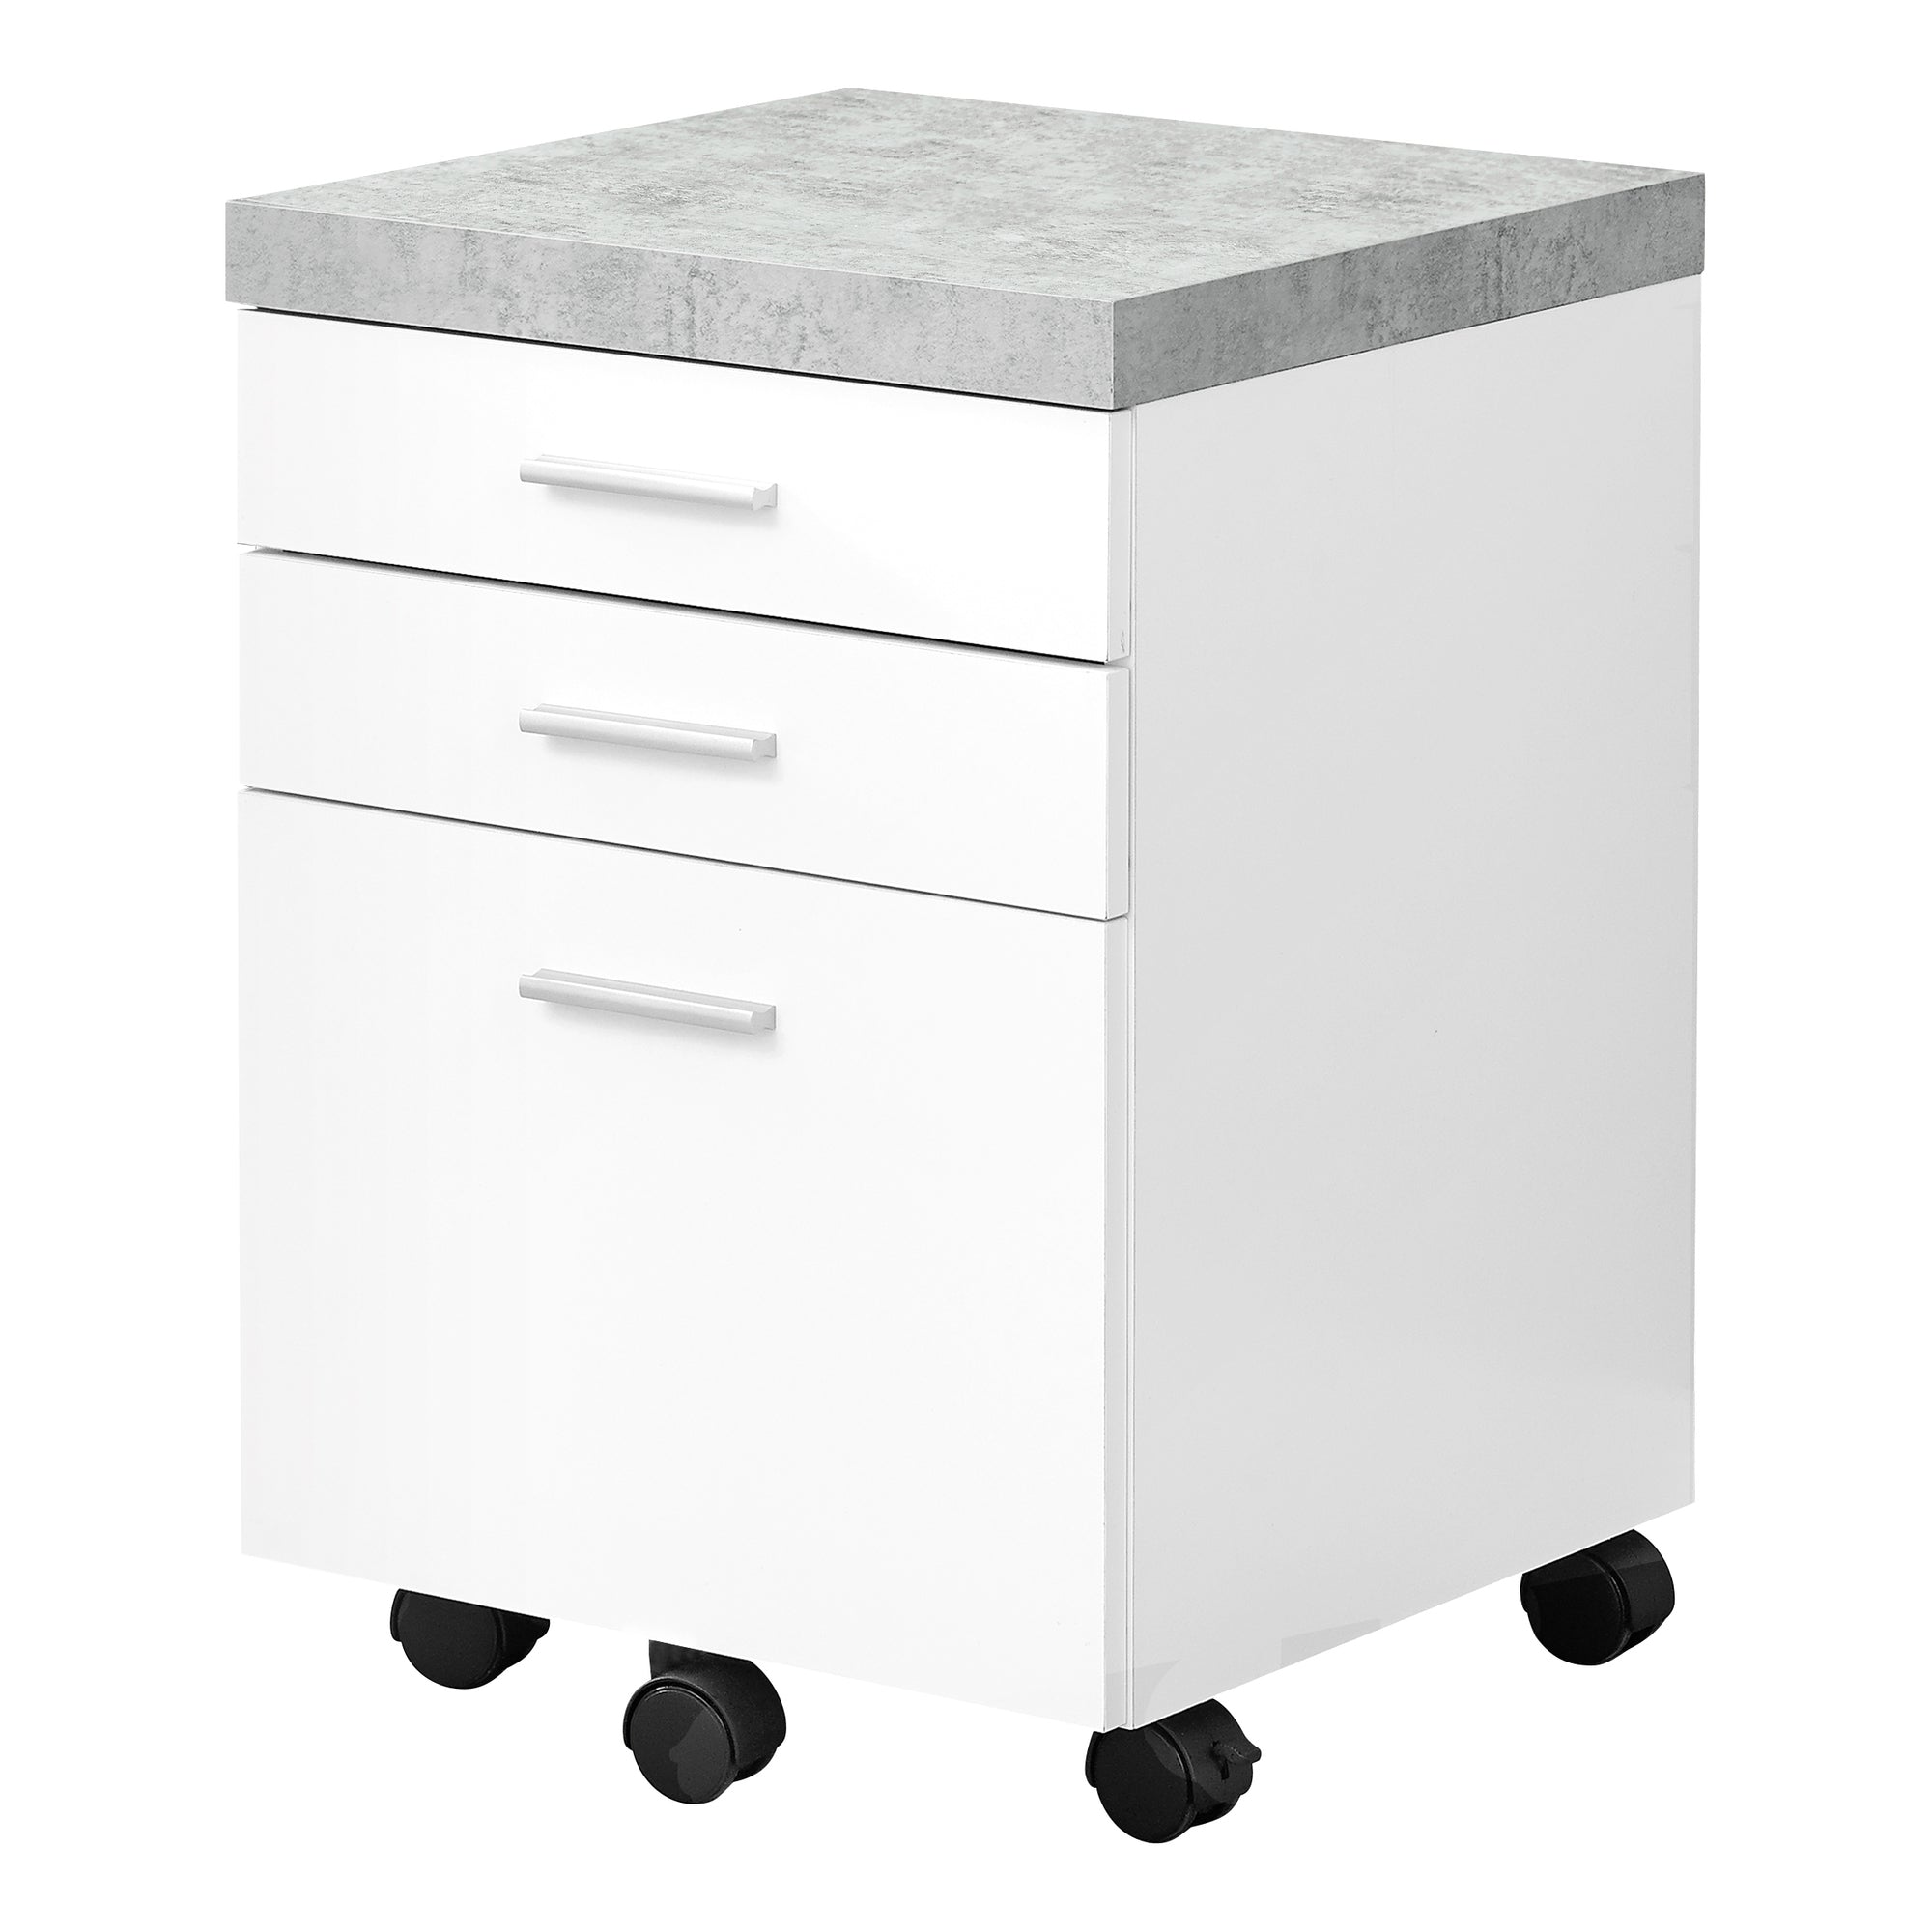 Filing Cabinet - 3 Drawer / White / Cement-Look On Castor